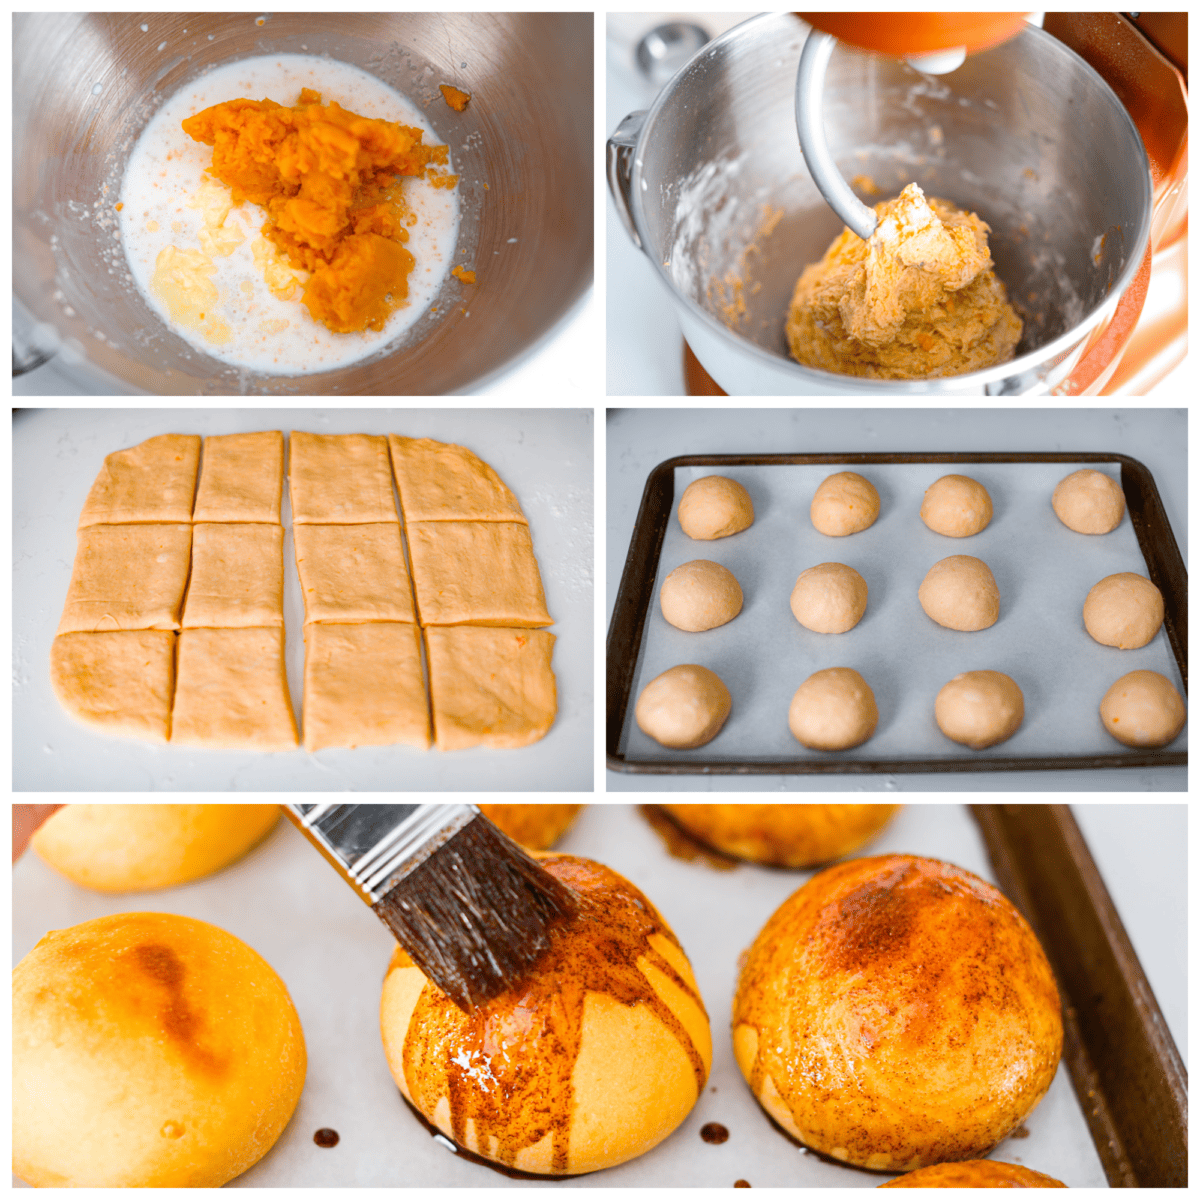 First photo of dough ingredients in the bowl of the stand mixer. Second photo of the dough mixed in a stand mixer. Third photo of dough cut into sections. Fourth photo of dough balls on a baking sheet pan ready to rise. Fifth photo of the glaze being brushed on a roll.